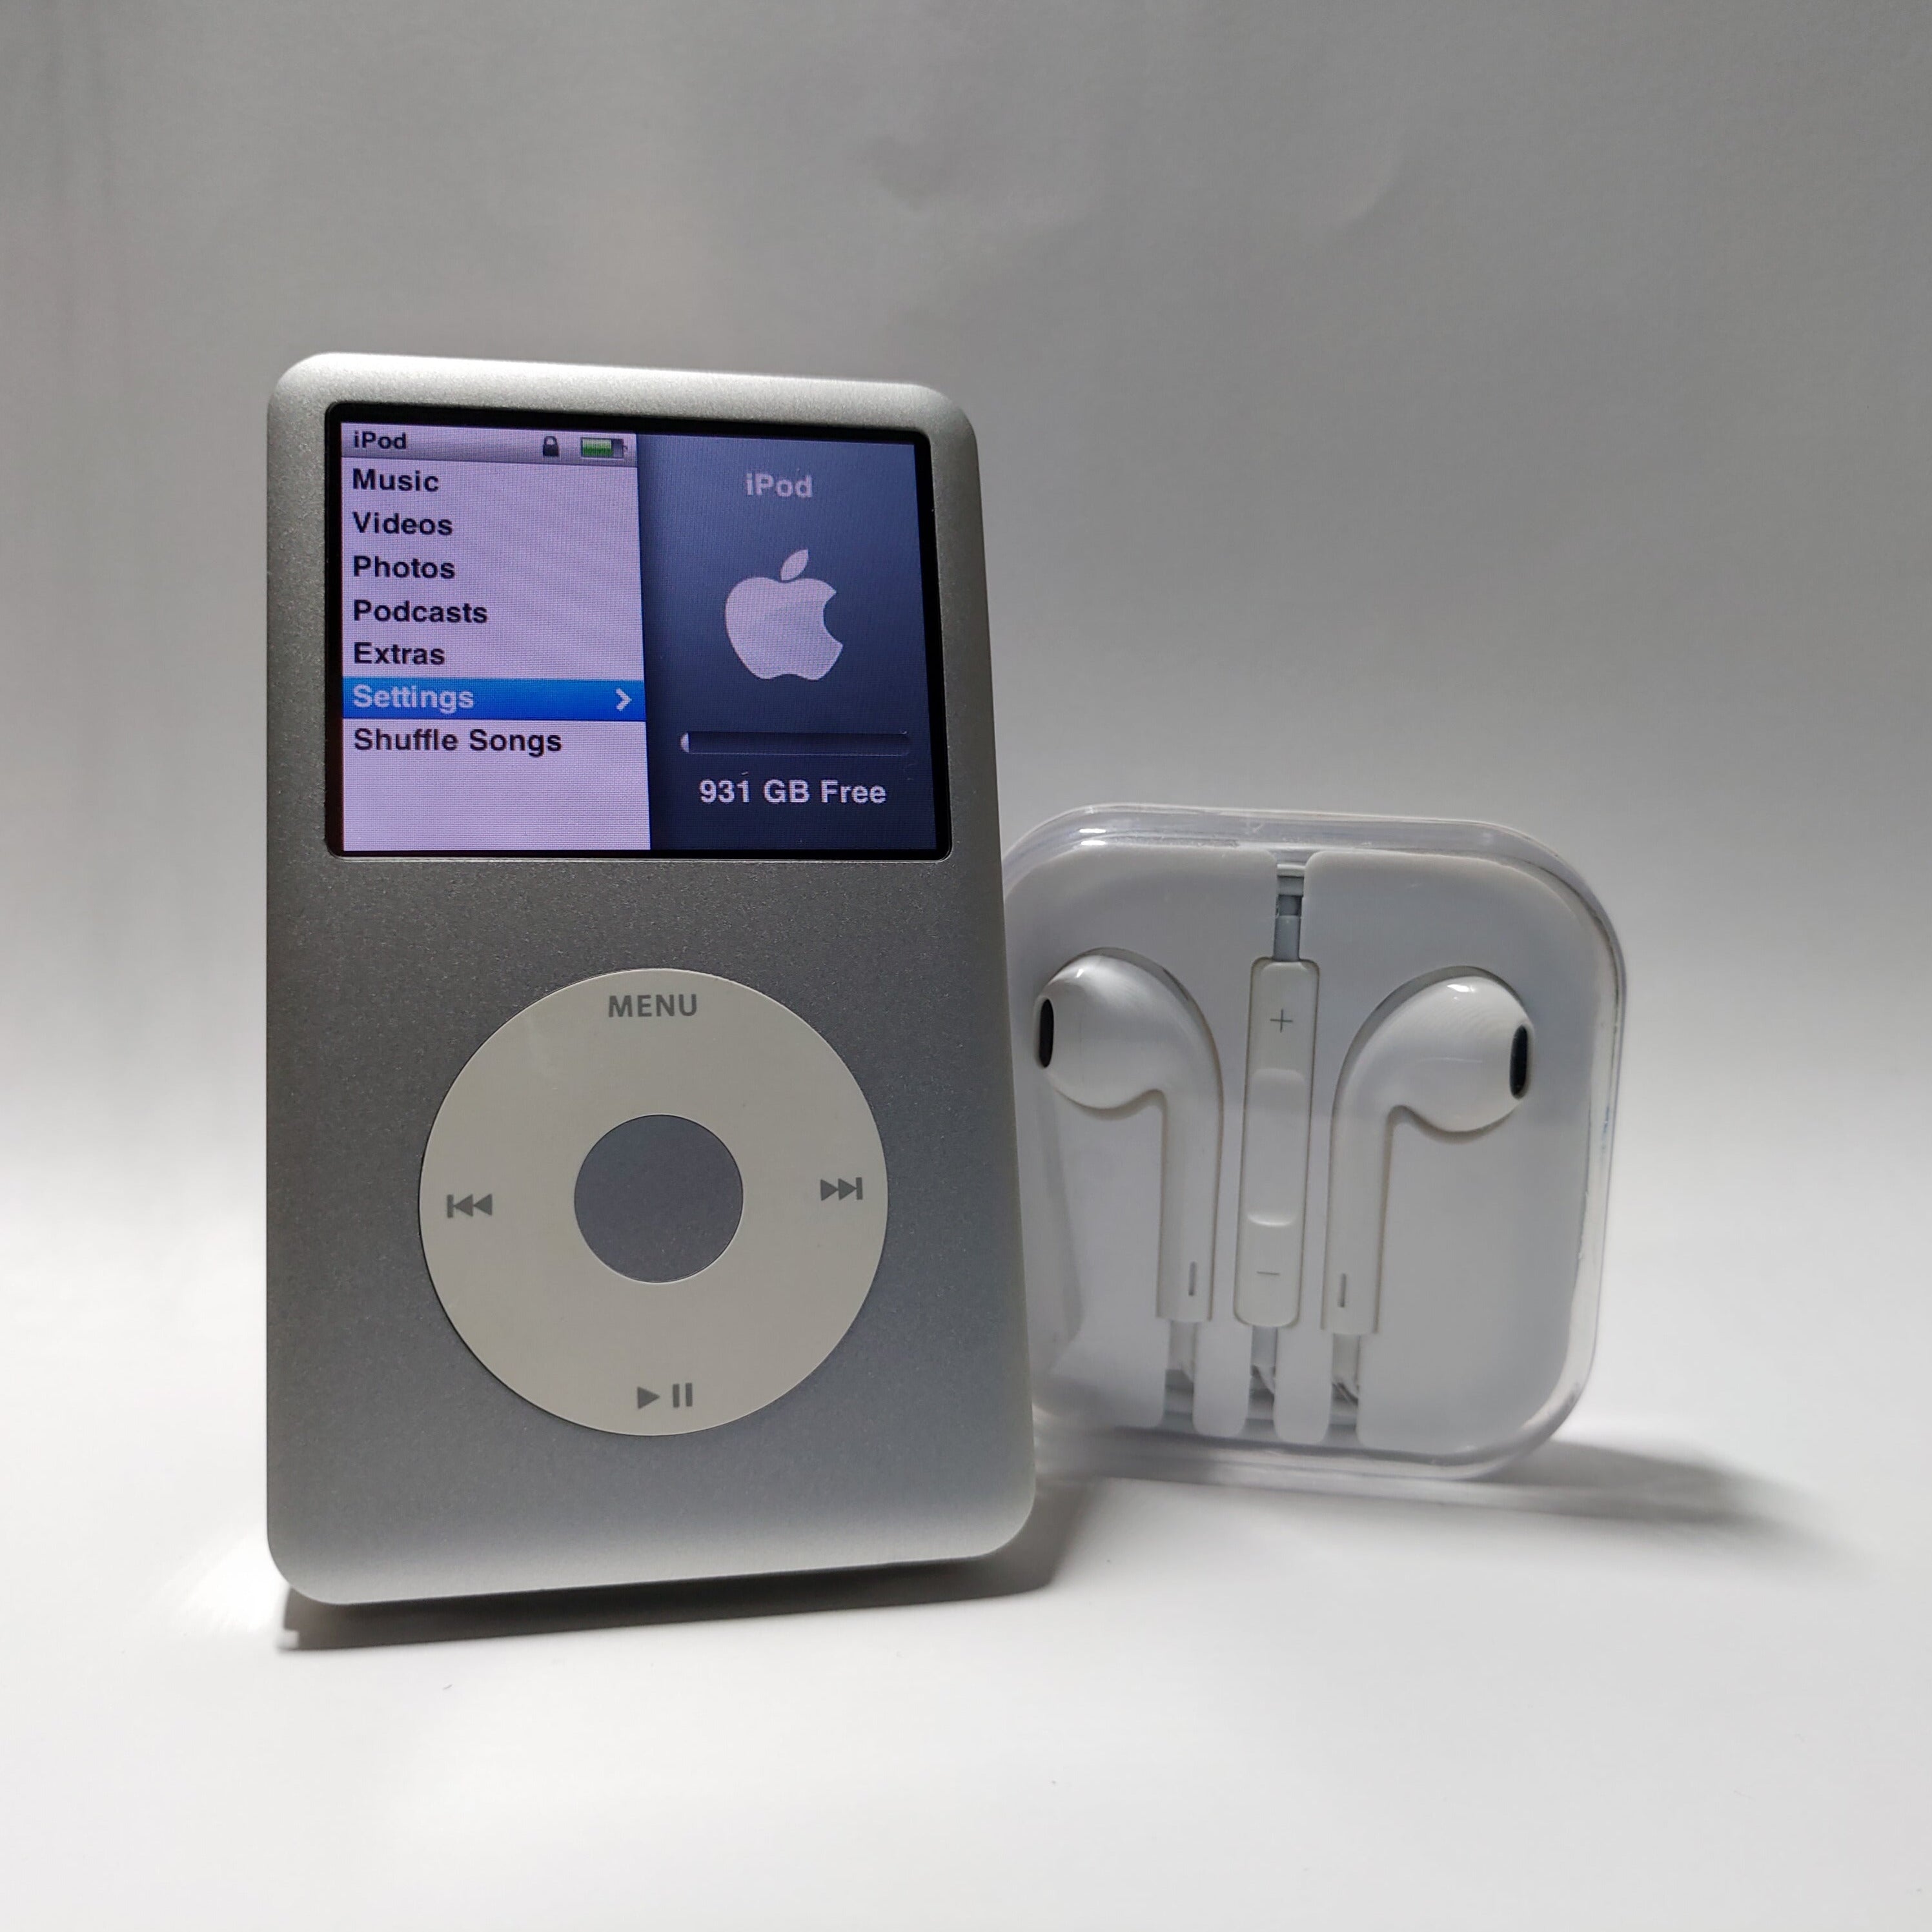 iPod classic - Silver | Flash Storage and Extended Battery